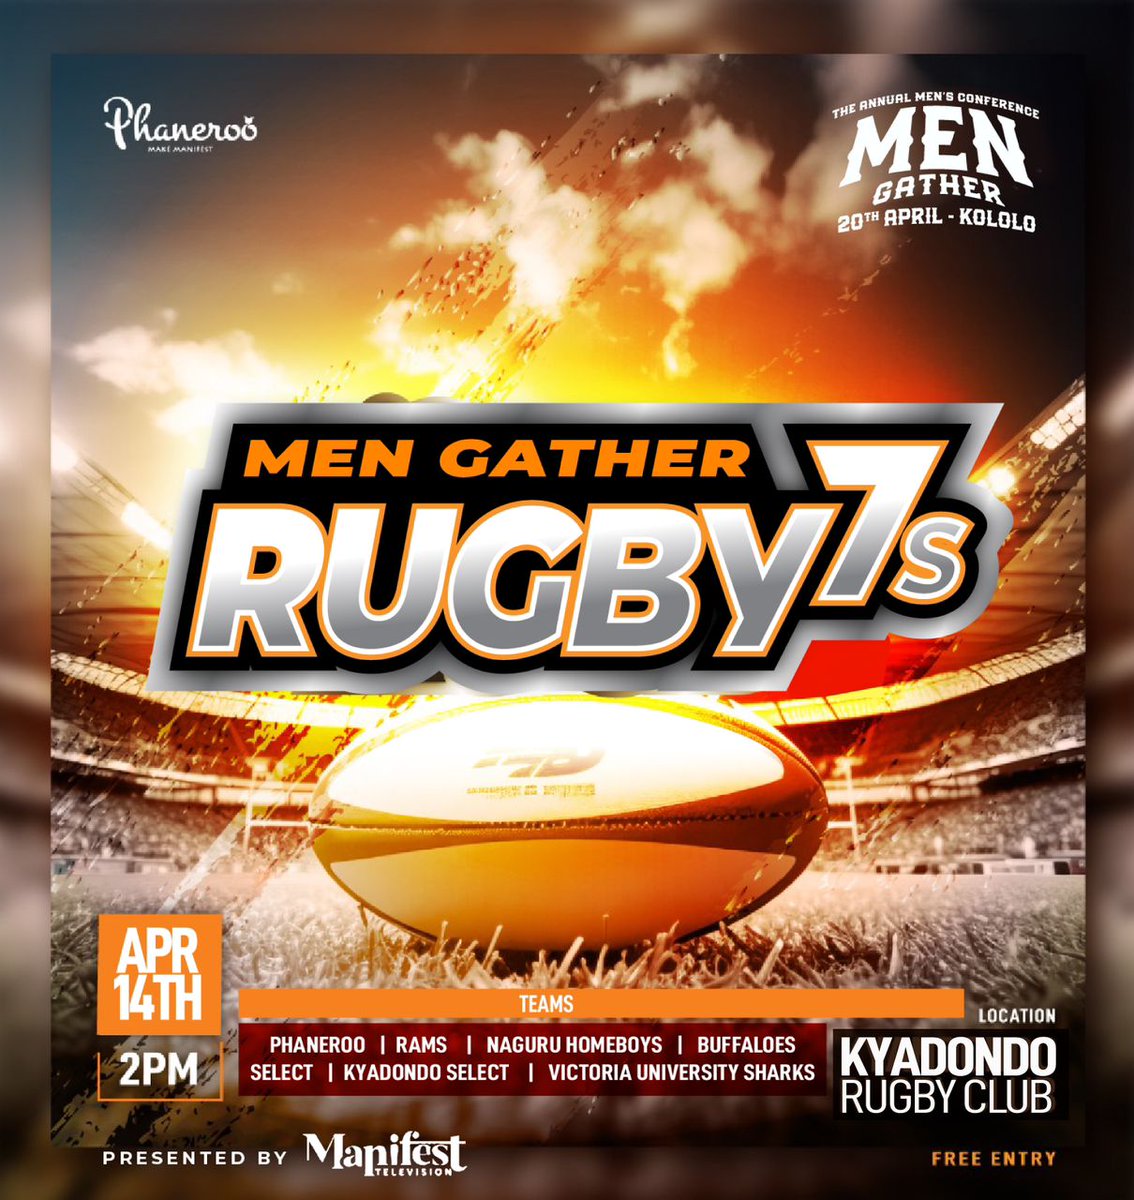 I know I can play, but the venue is tempting. Kyadondo is calling me for other talents.

Which talent can you perform well at Kyandondo Rugby Grounds?

🗓Sunday, April 14th 2024
⏰2pm EAT
📍Kyadondo Rugby Club 

#MenGatherVII
#ThePriest